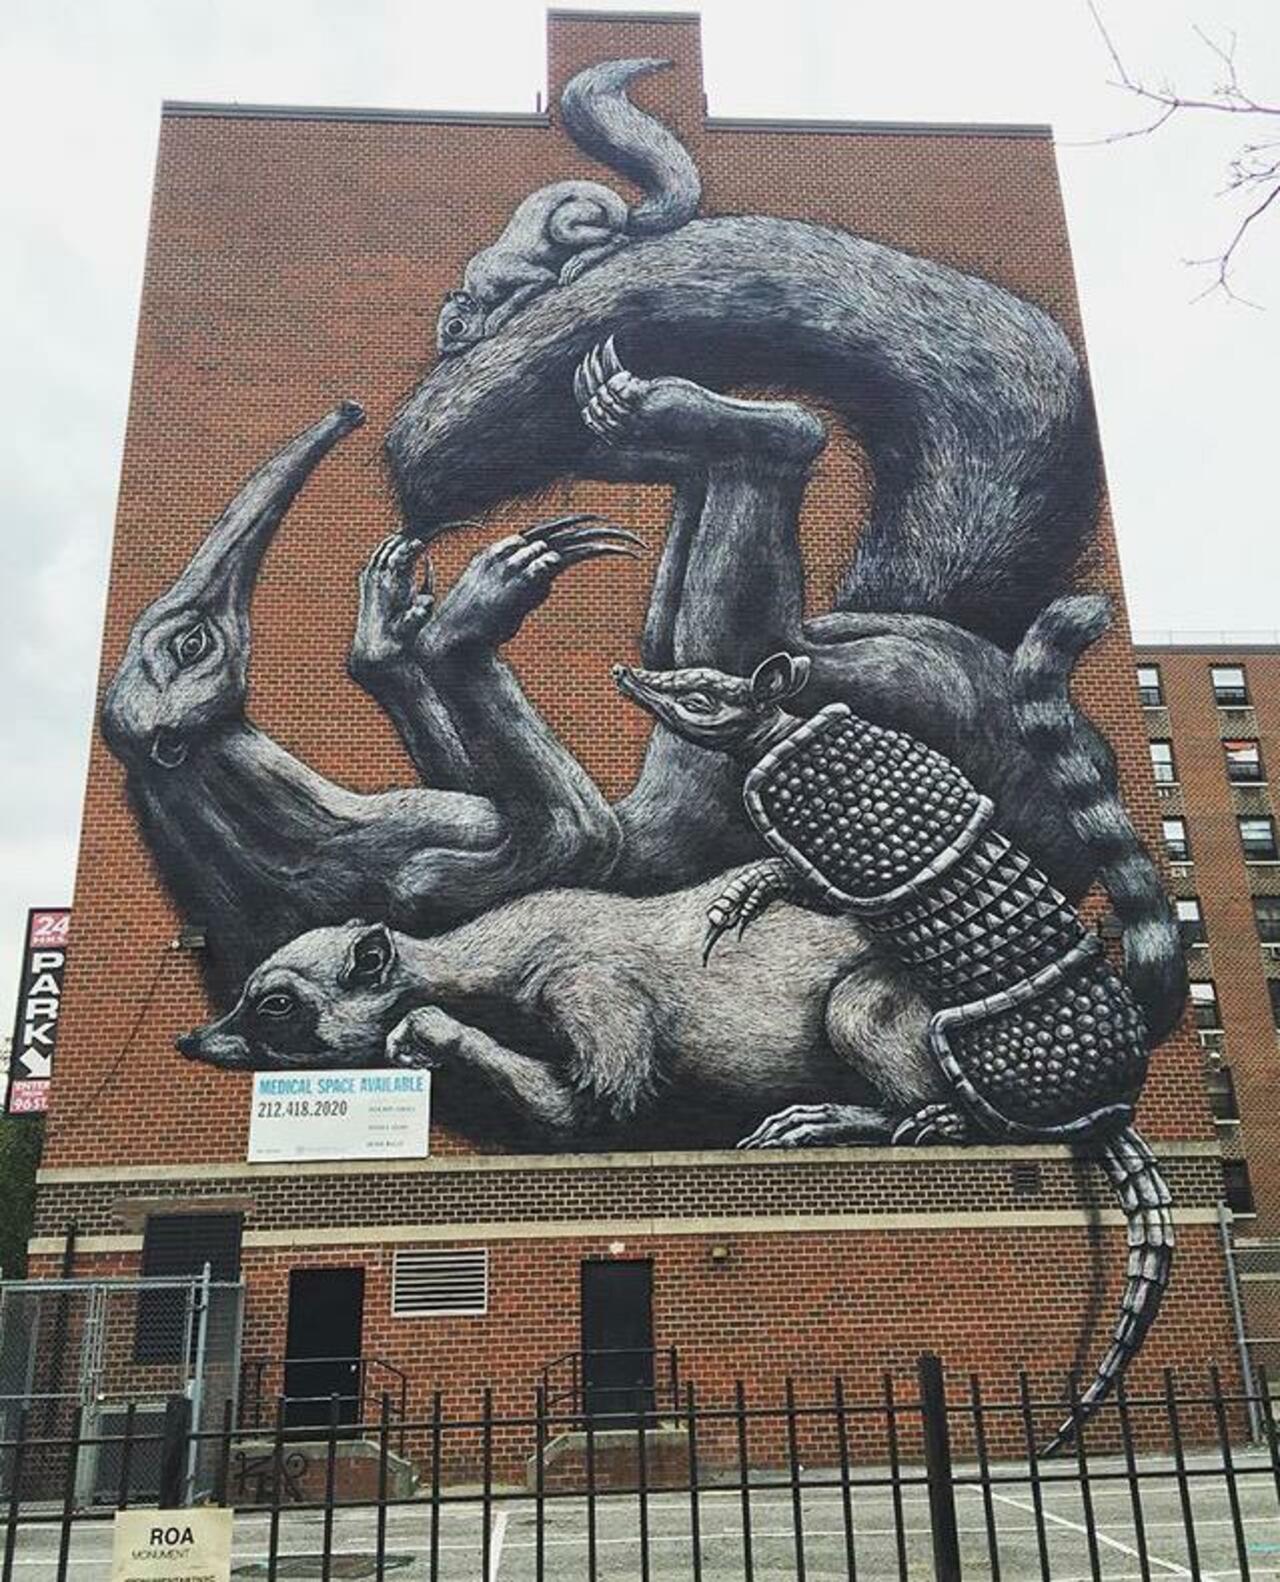 The completed new large scale Street Art wall by ROA in NYC

#art #graffiti #mural #streetart http://t.co/hOC2QjLPKA